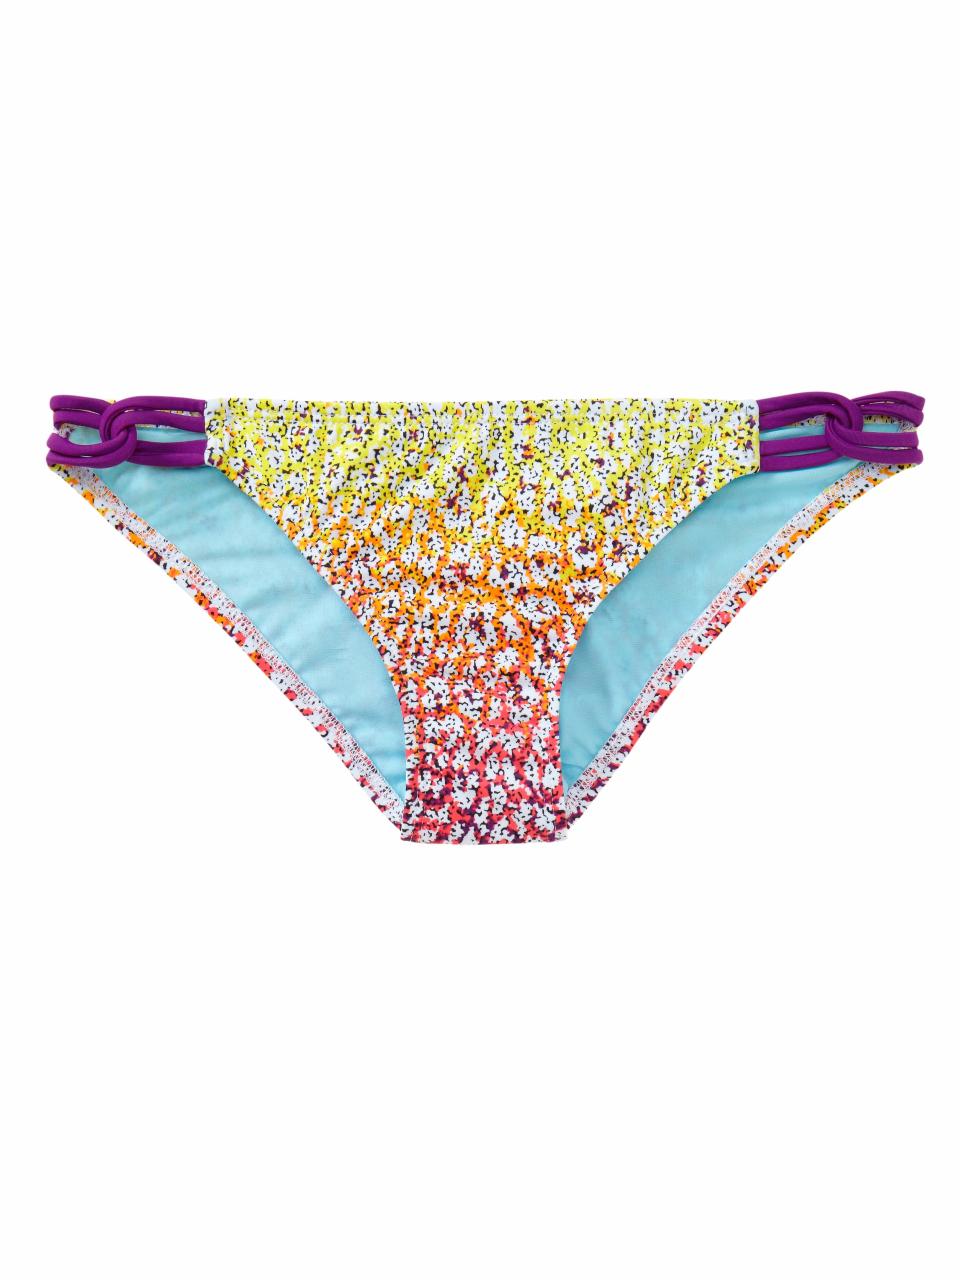 This product image released by Athleta shows a bikini bottom. Swim separates, including bikini and tankini tops, and brief, bikini and short-style bottoms, were introduced into wide distribution several years ago. They were intended to solve a practical problem when consumers needed a bigger top or bigger bottom, but women have since started using them to make a style statement. (AP Photo/Athleta)